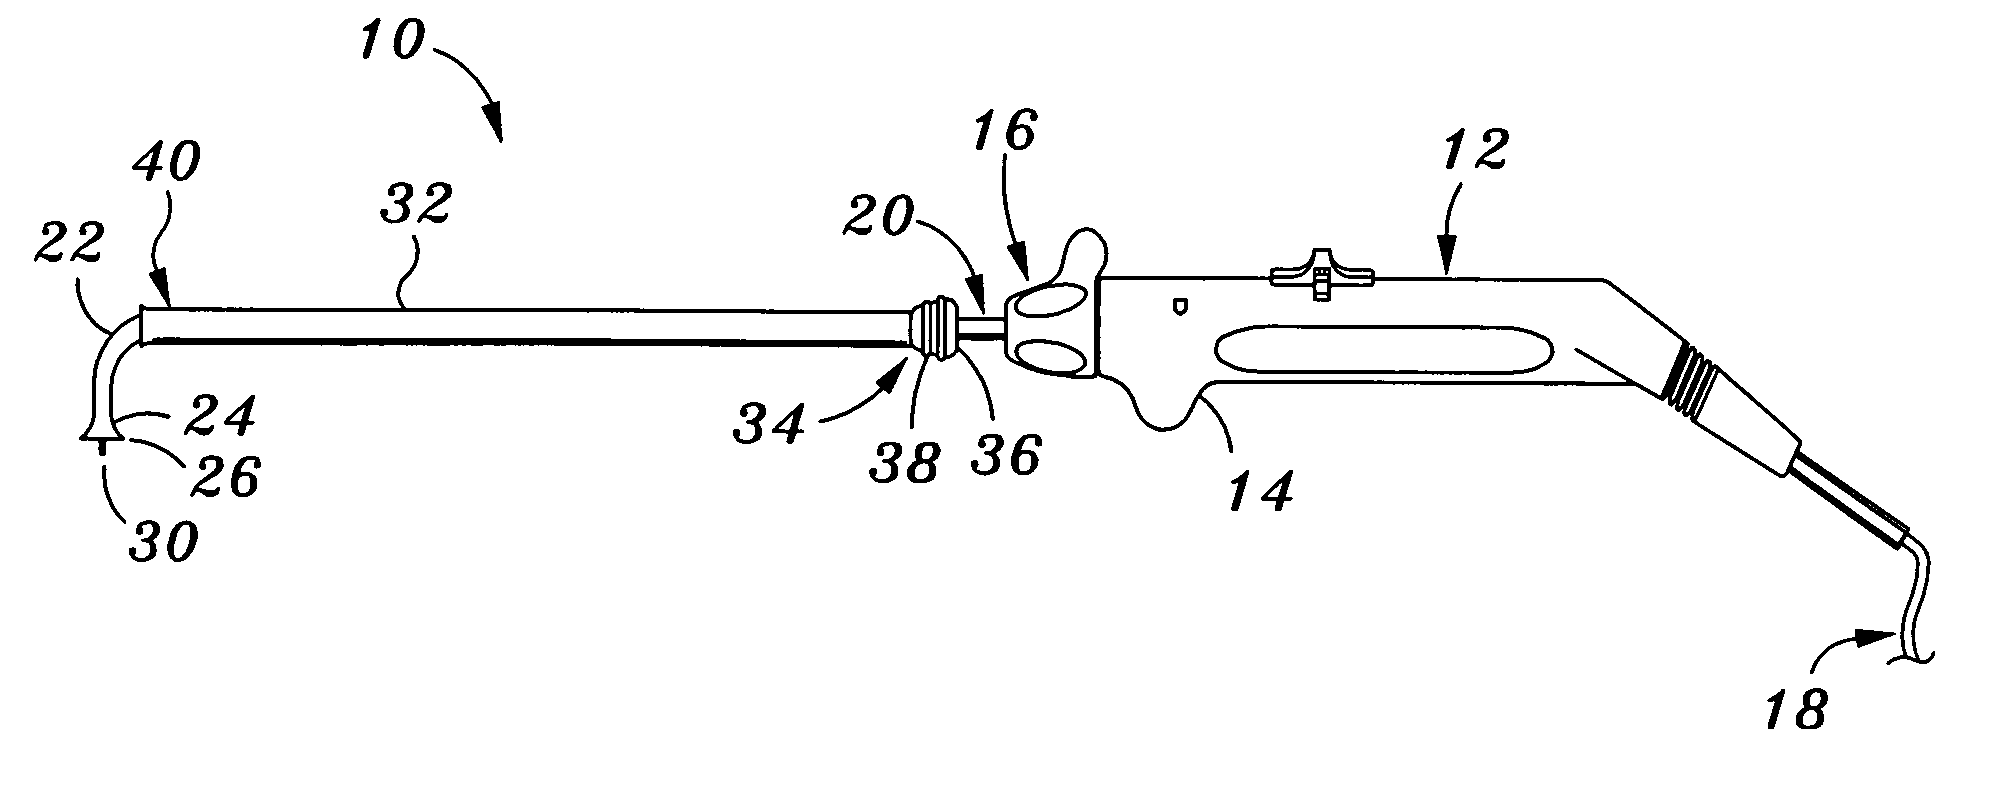 Surgical apparatus having configurable portions